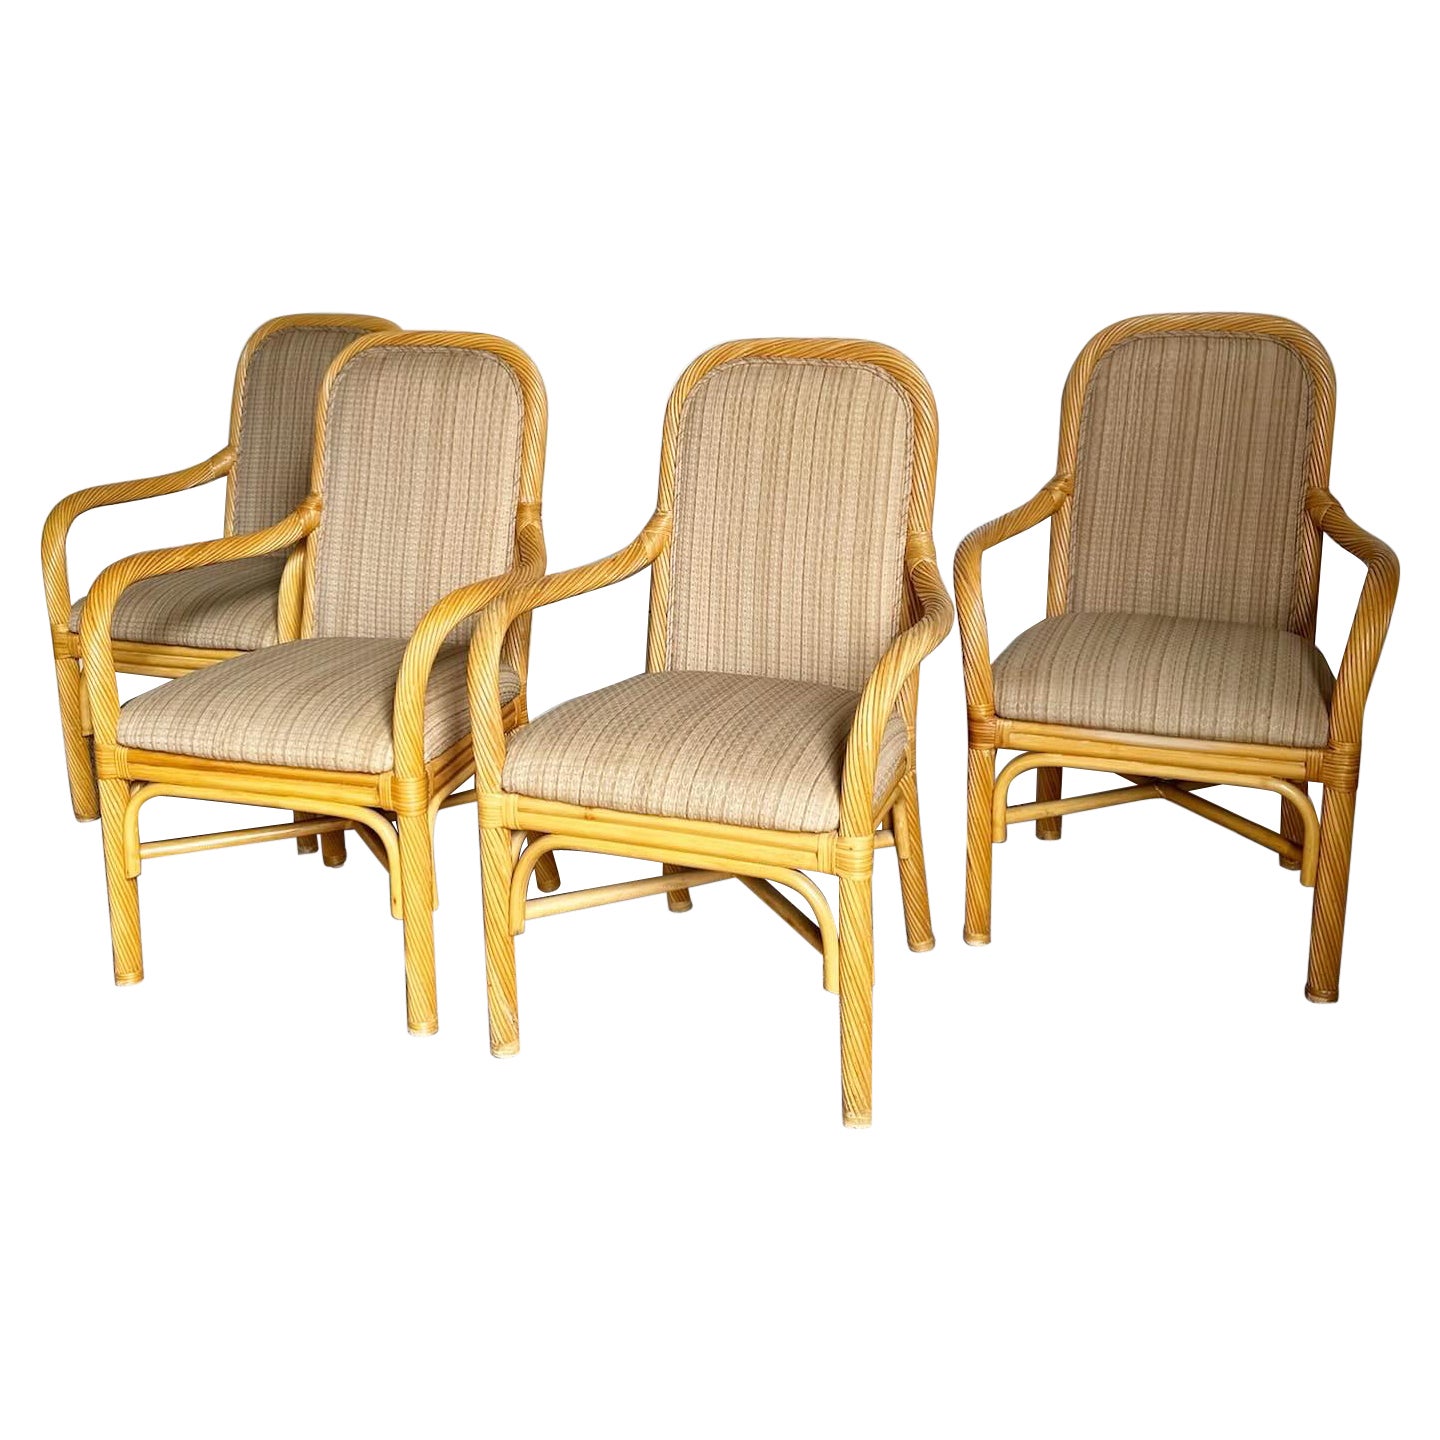 Boho Chic Twisted Pencil Reed Rattan Arm Dining Chairs - Set of 4 For Sale